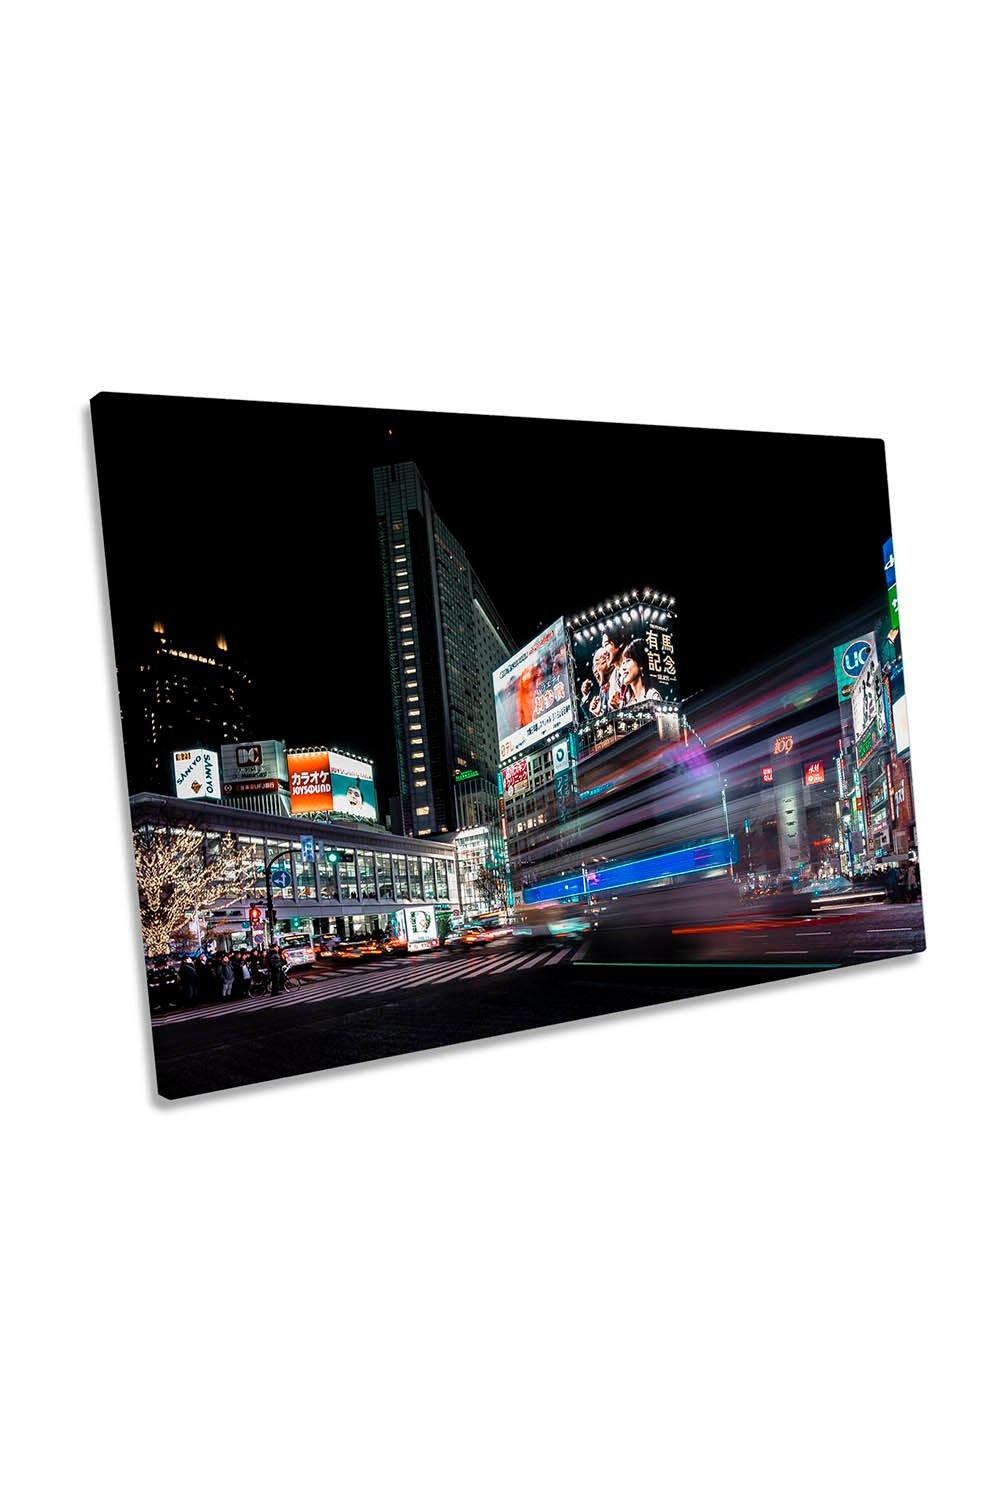 Colours of Tokyo Japan Shibuya Crossing Canvas Wall Art Picture Print